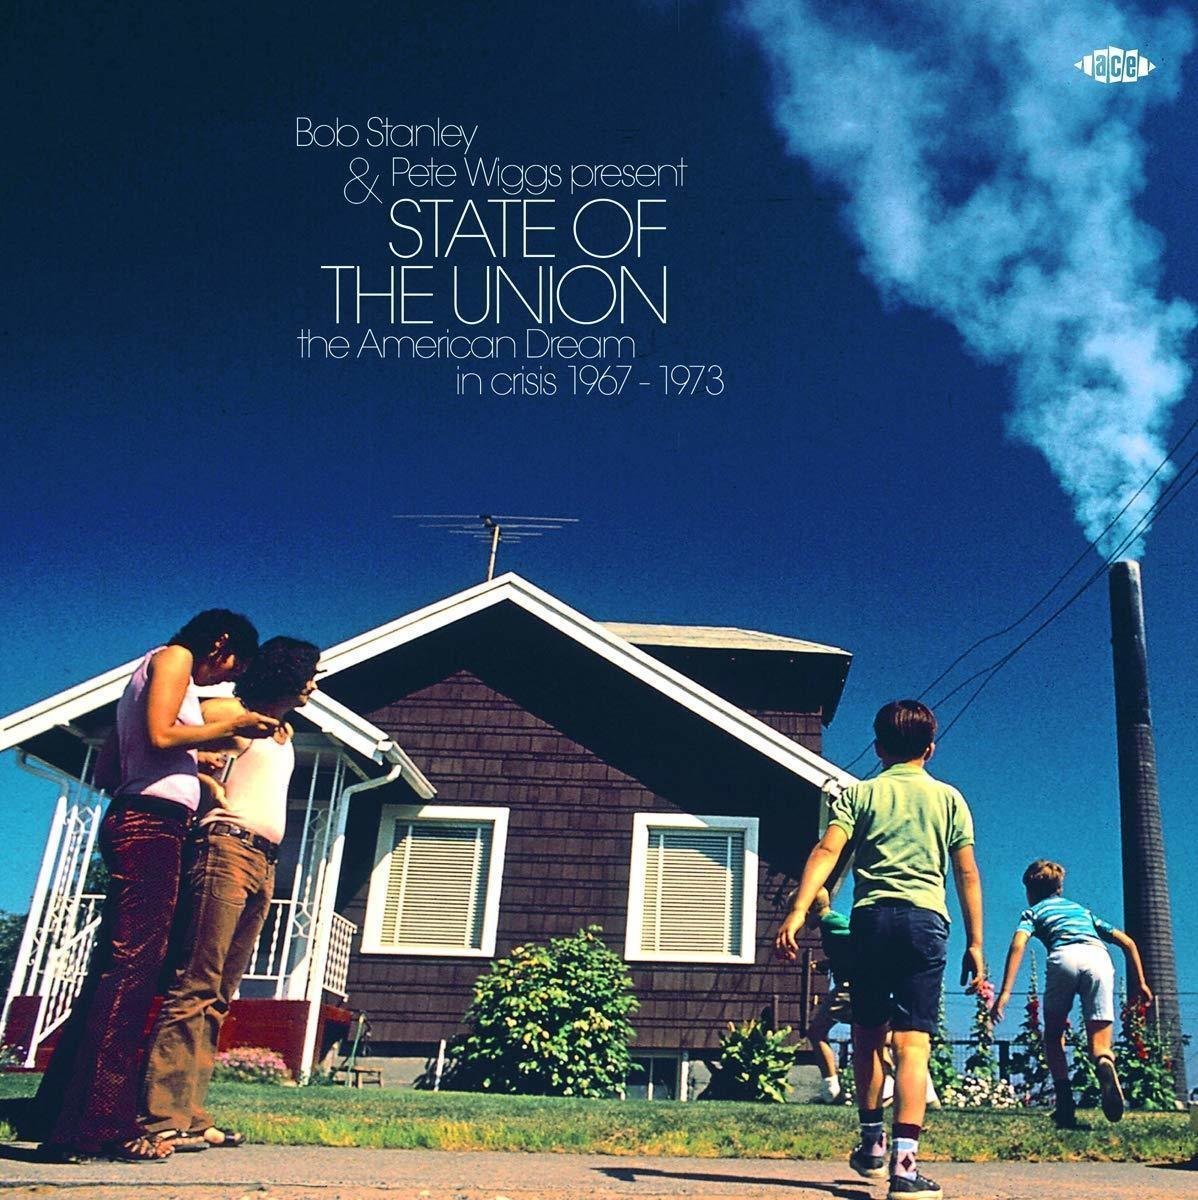 Vinyl Record Various Artists - State Of The Union - Bob Stanley & Pete Wiggs Present (2 LP)